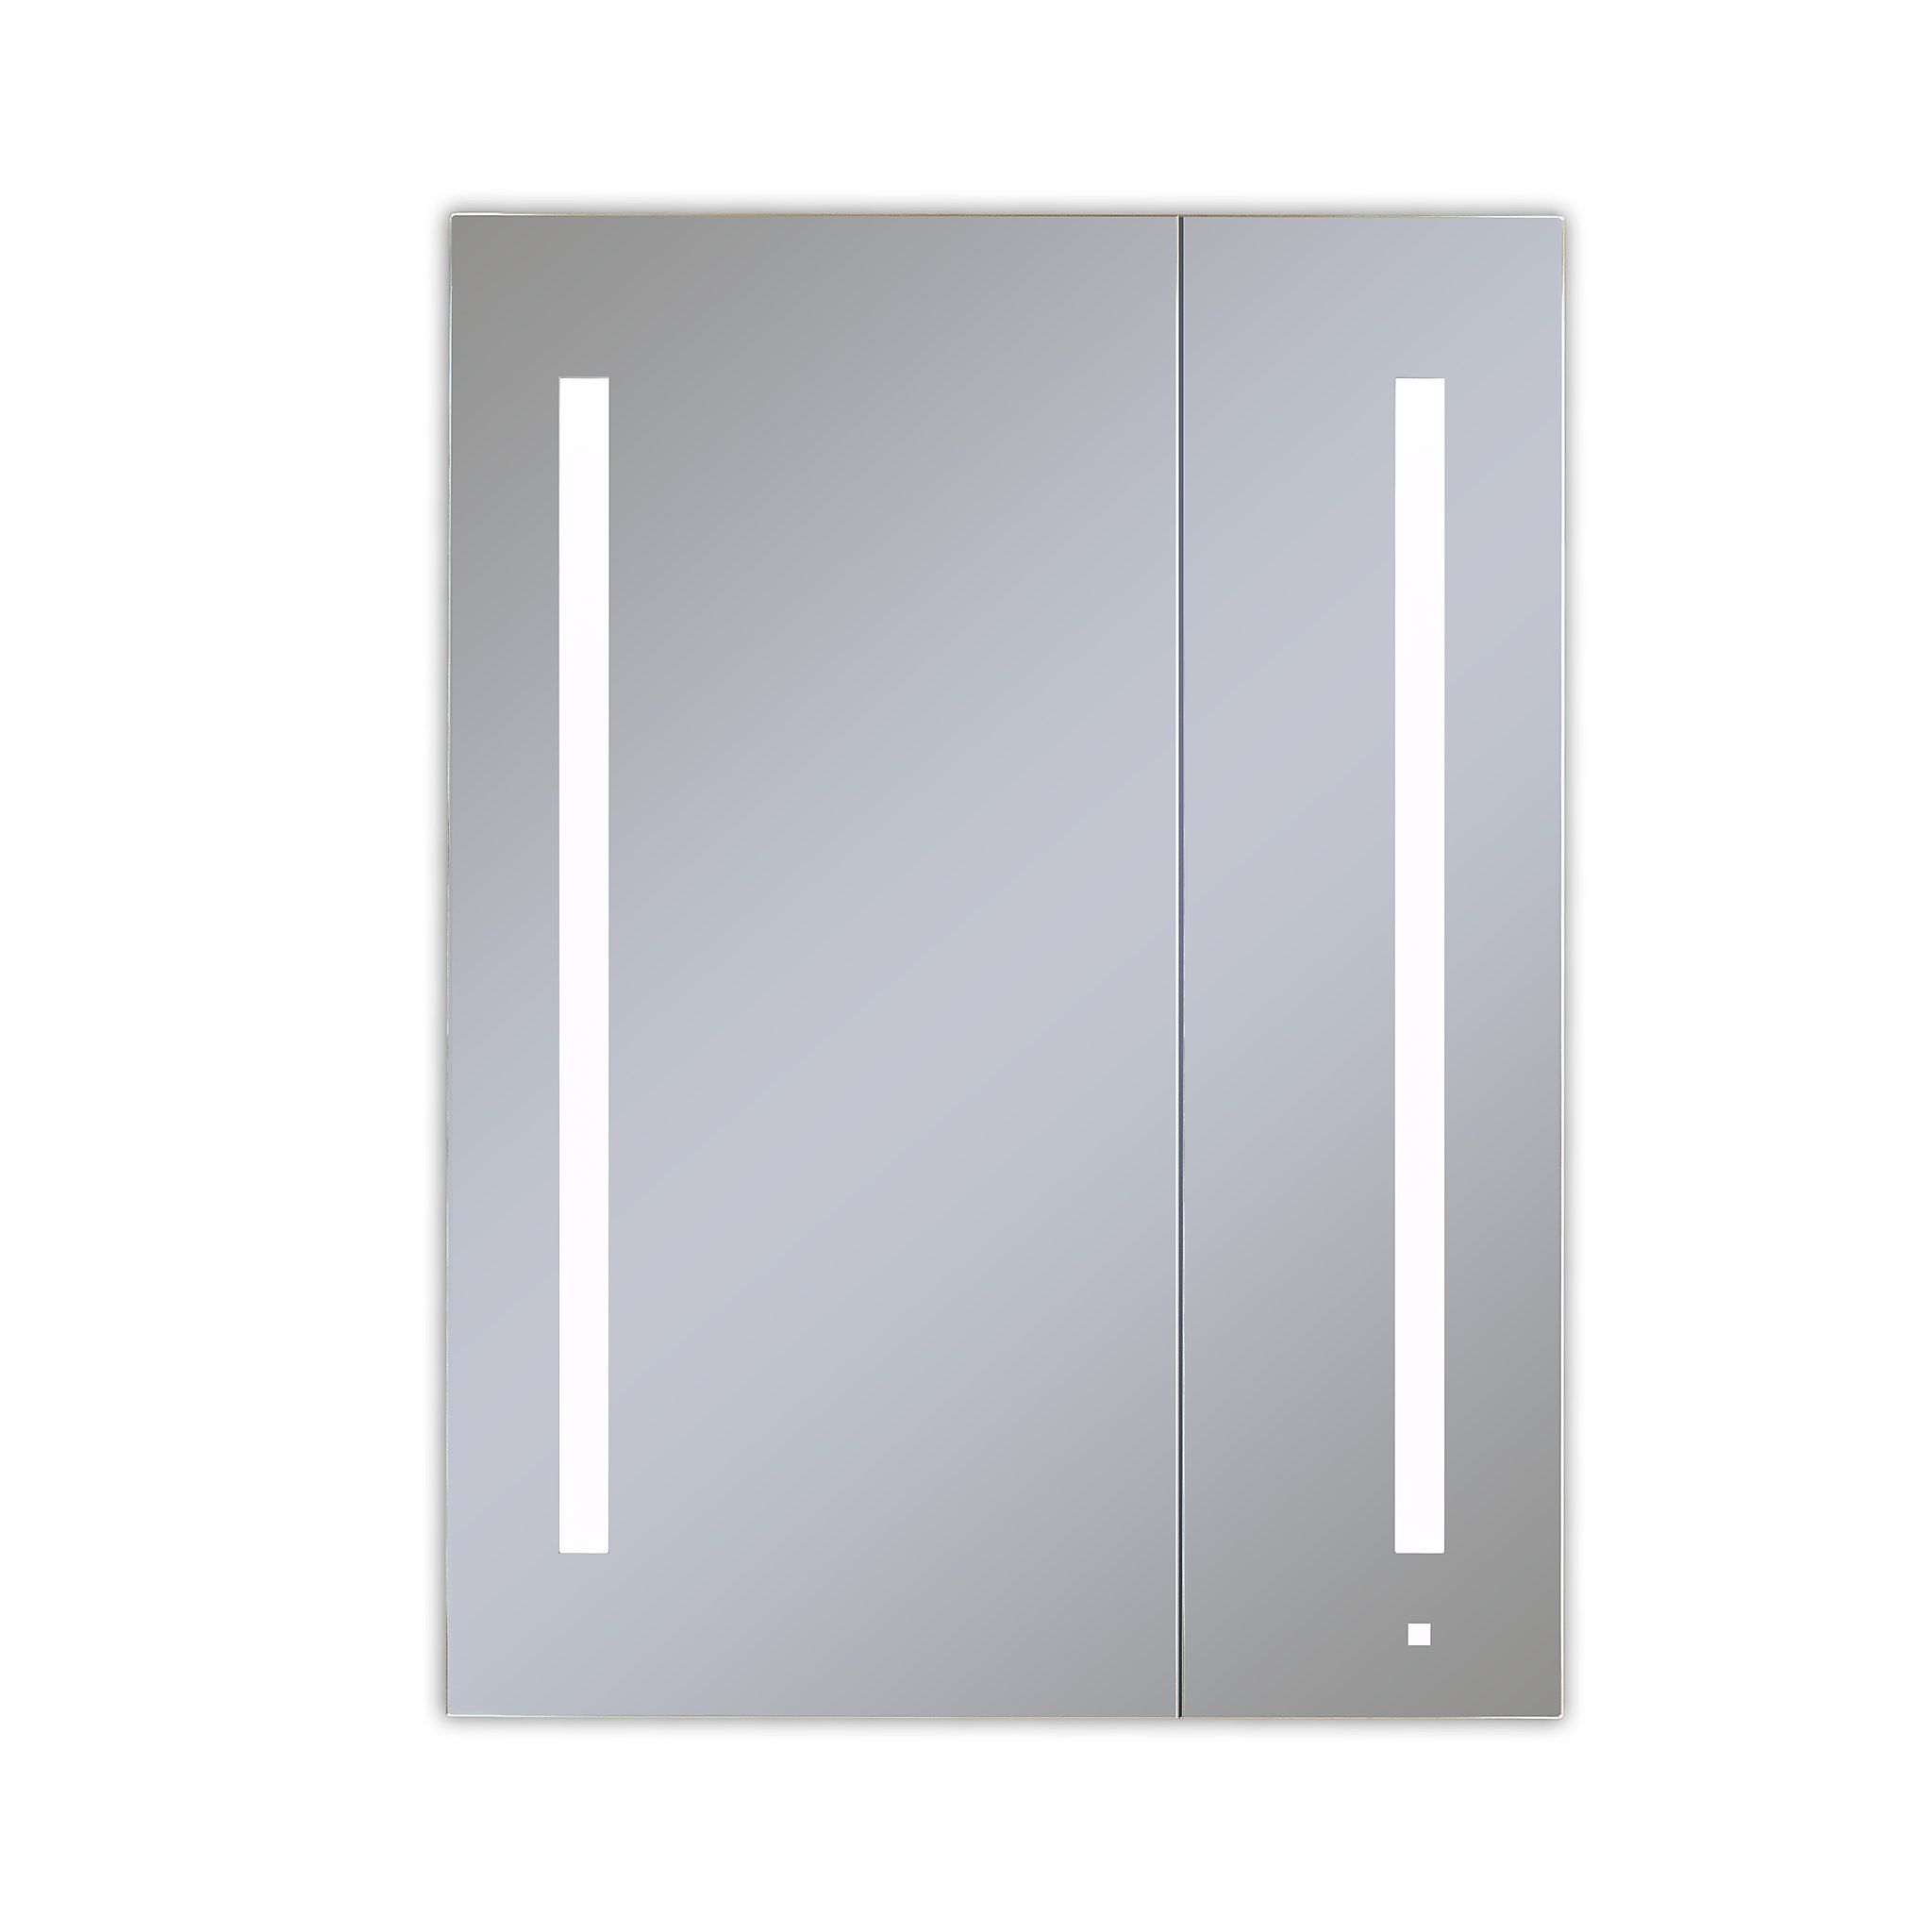 Robern AC3040D4P2L AiO Lighted Cabinet, 30" x 40" x 4", Two Door, LUM Lighting, 4000K Temperature (Cool Light), Dimmable, Electr